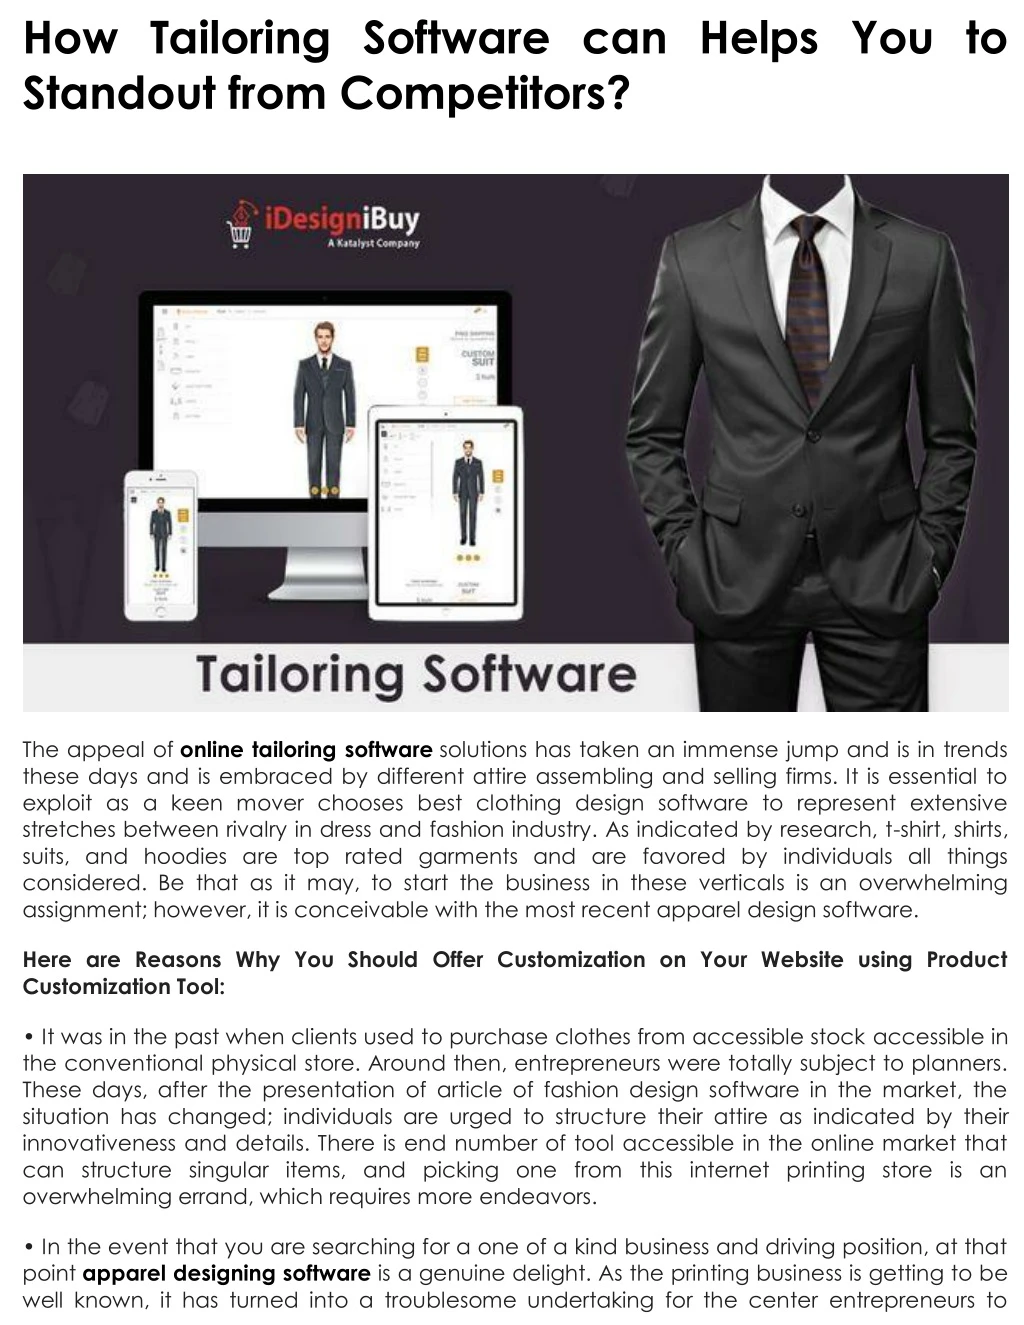 how tailoring software can helps you to standout